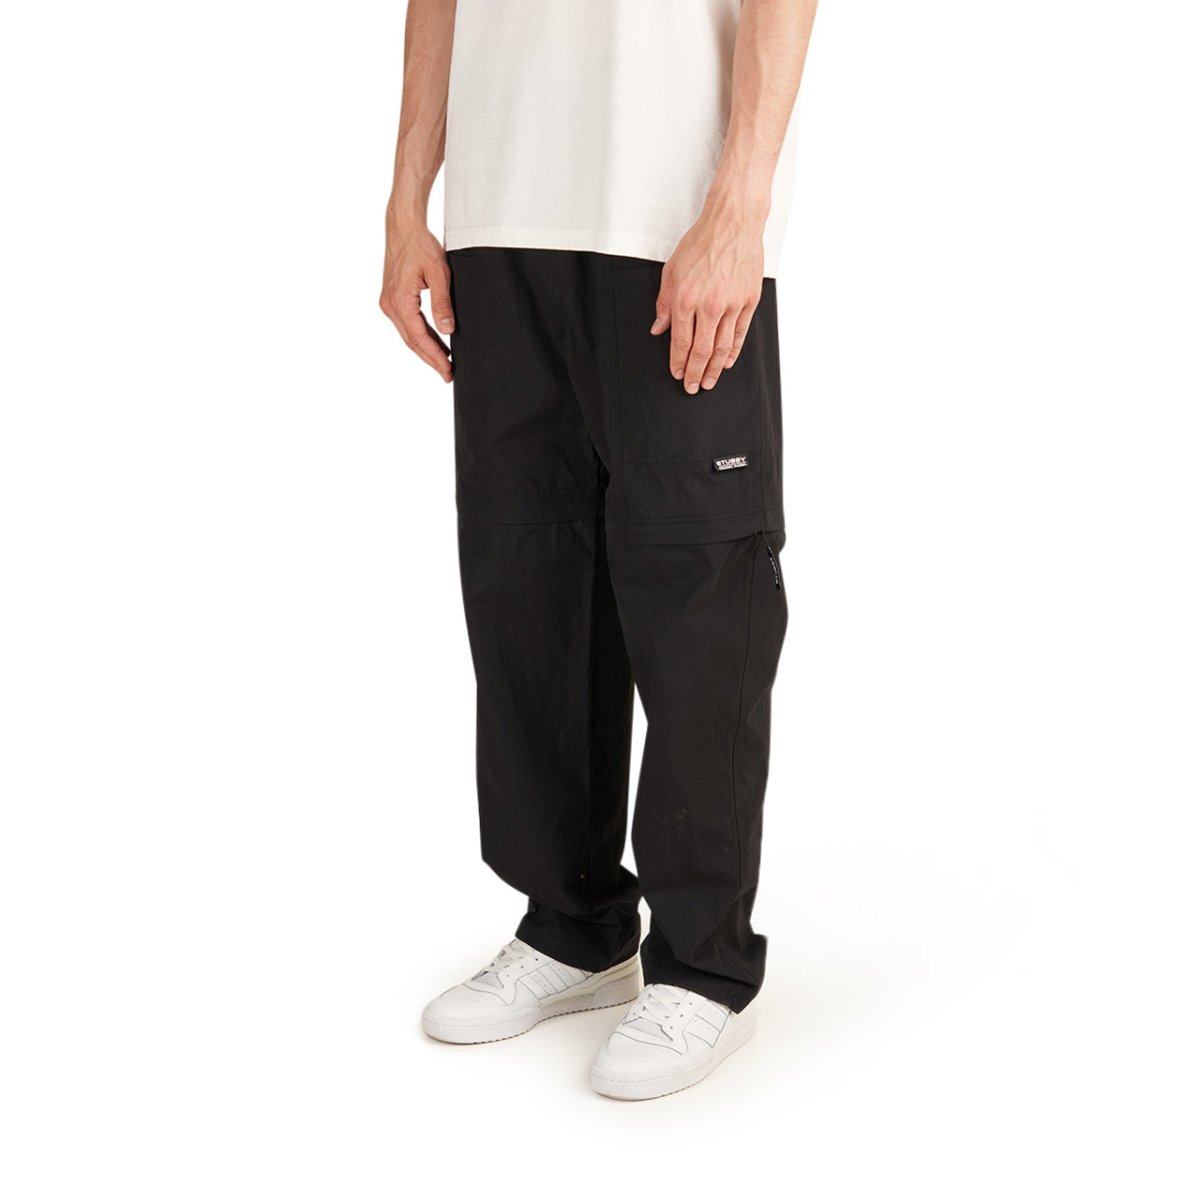 Stüssy Nyco Convertible Pant (Black) 116546-0001 – Allike Store